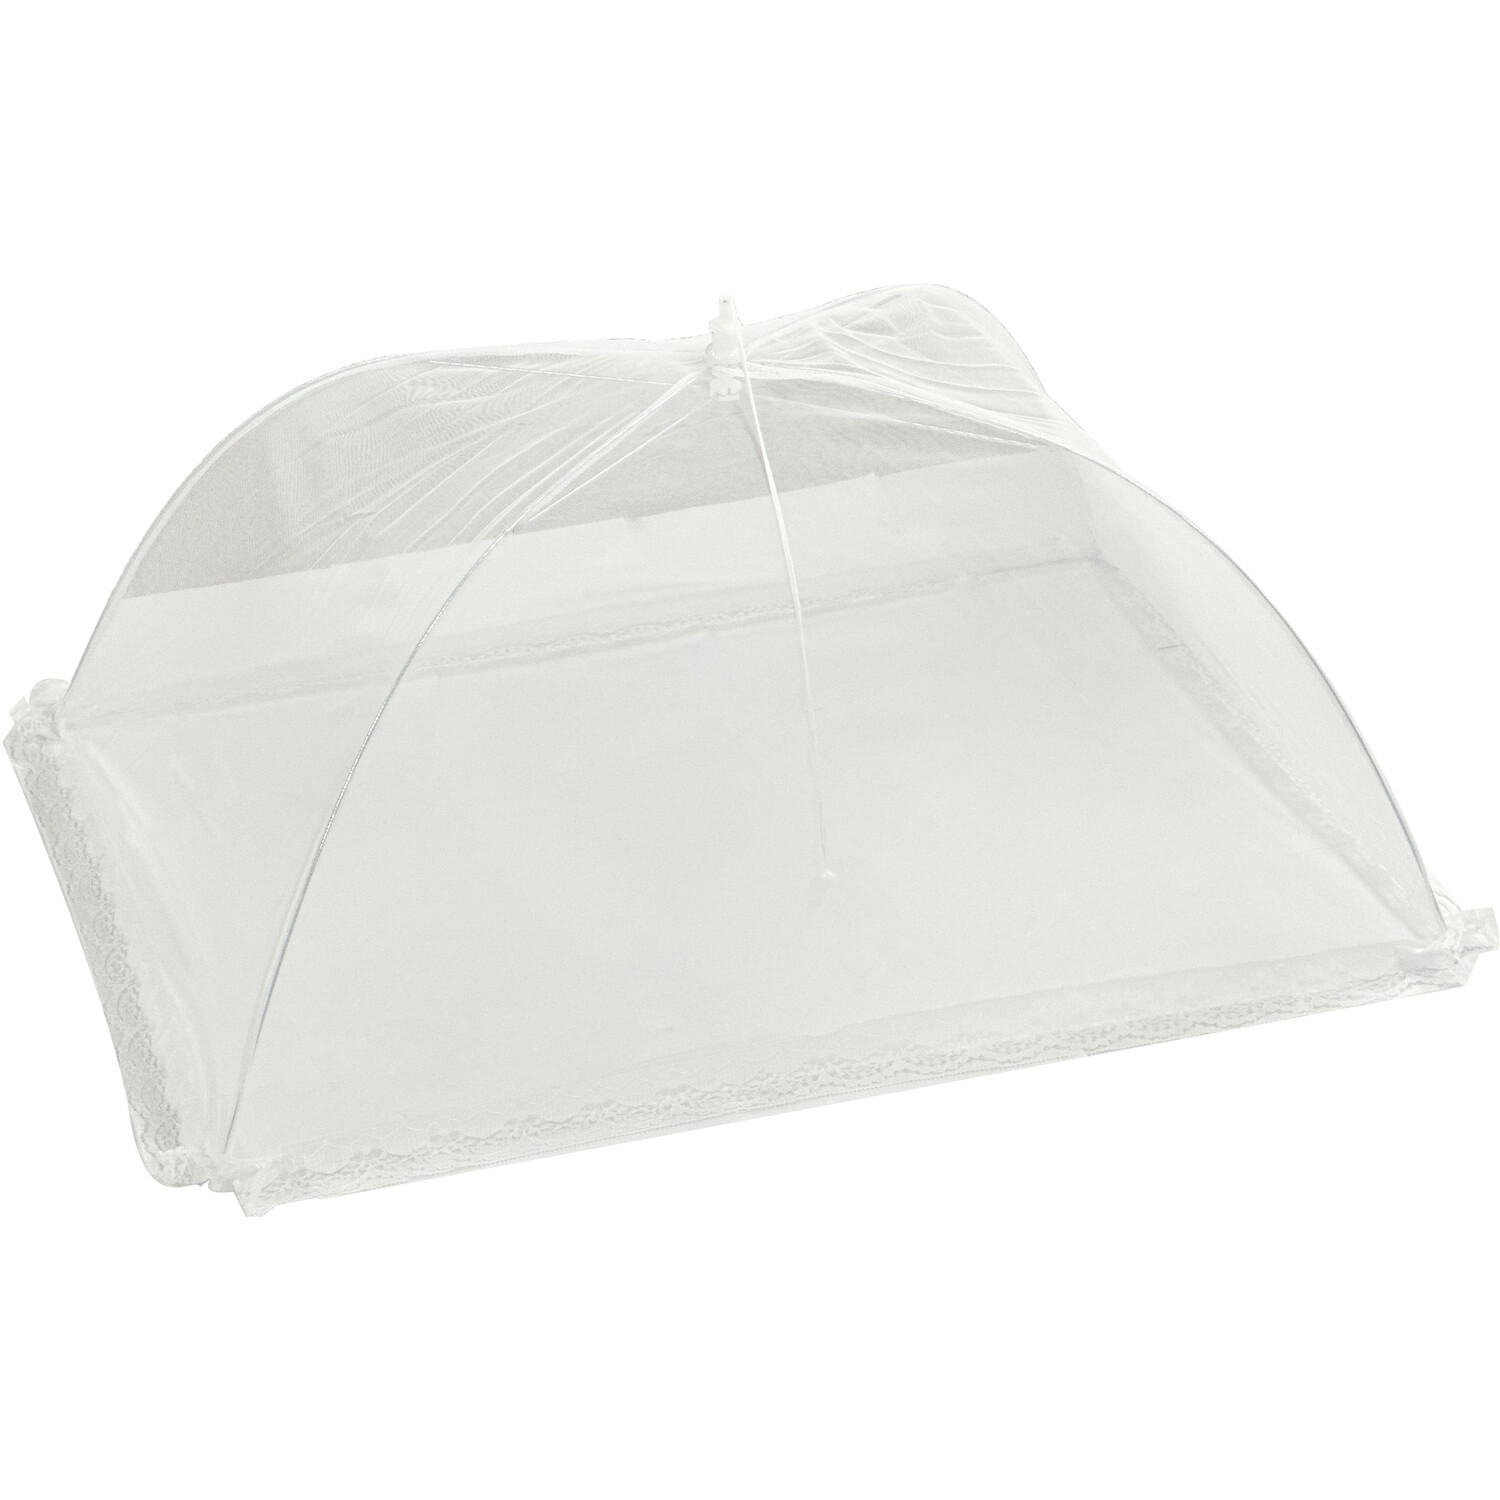 Food Cover - White Image